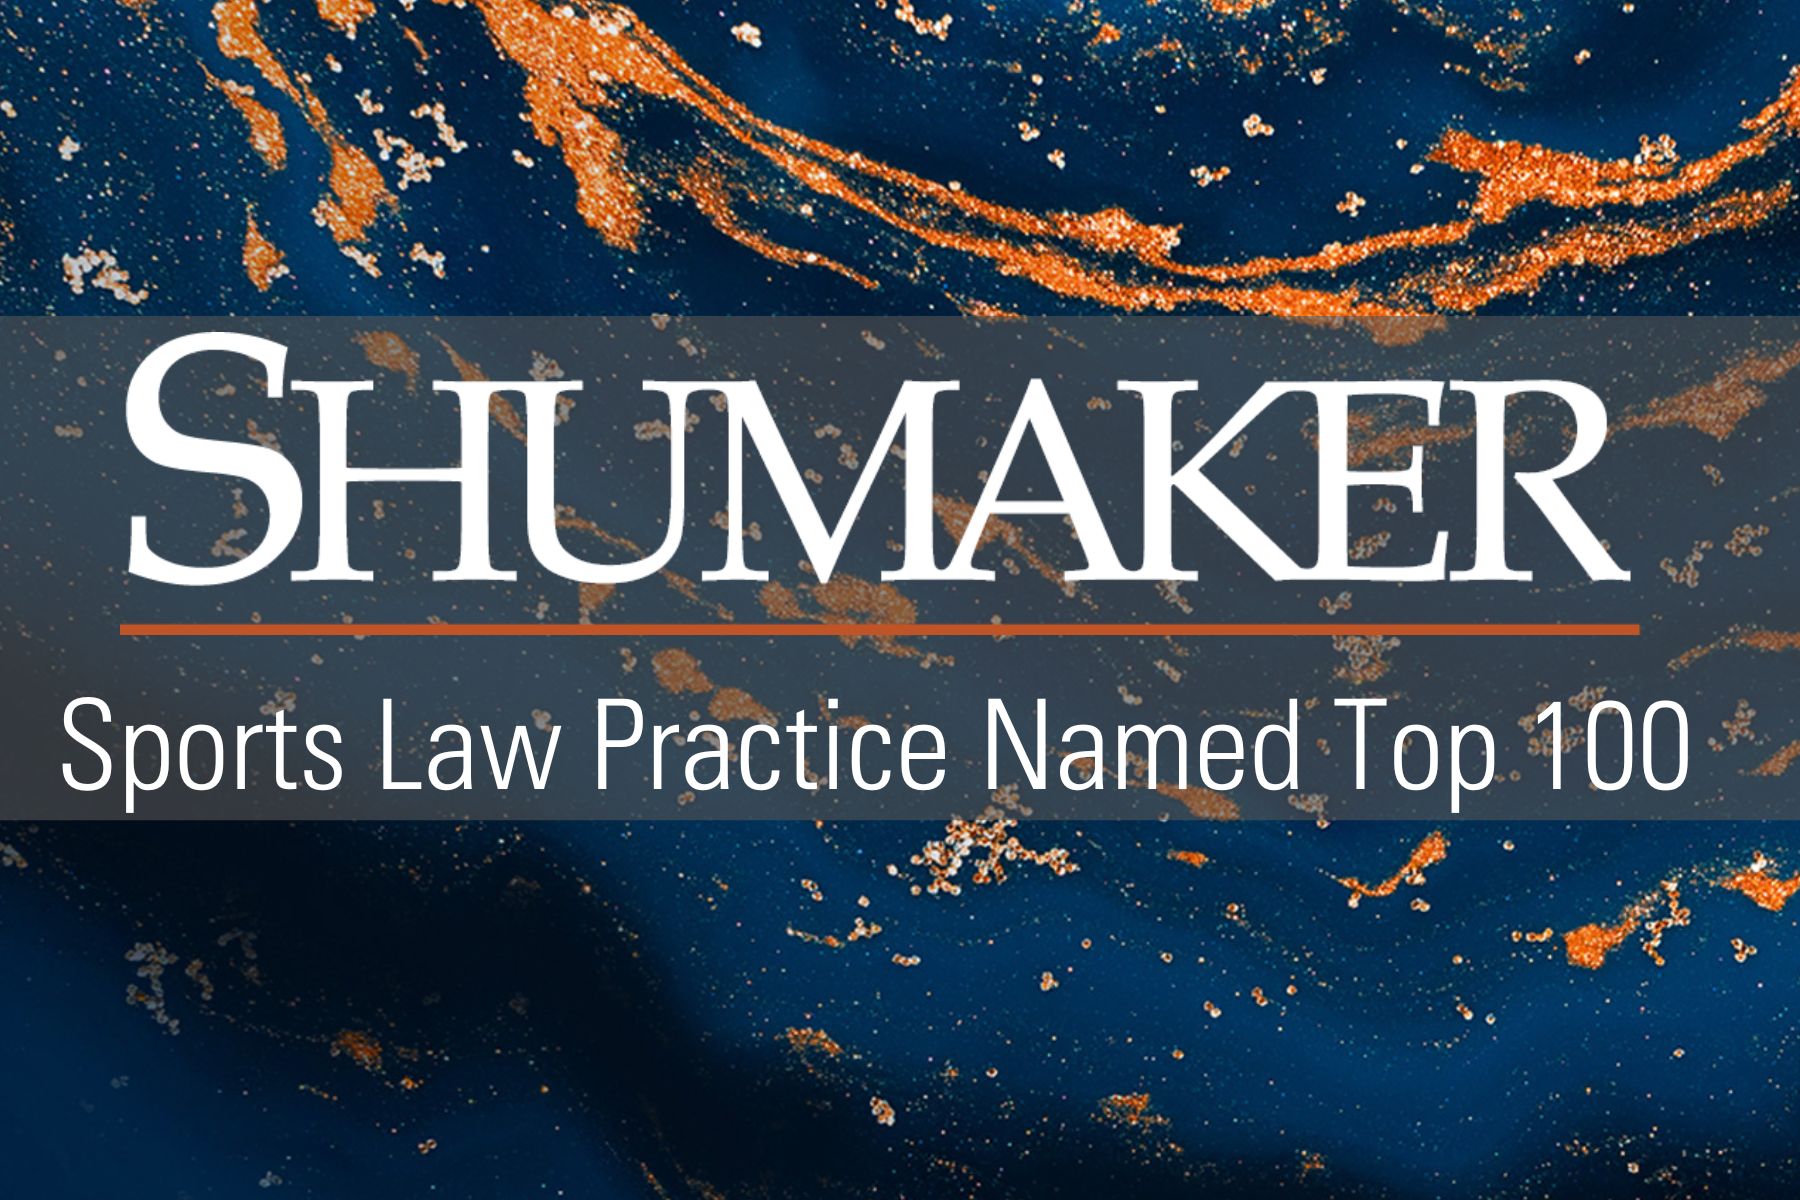 Shumaker’s Sports Law Practice Named Top 100 